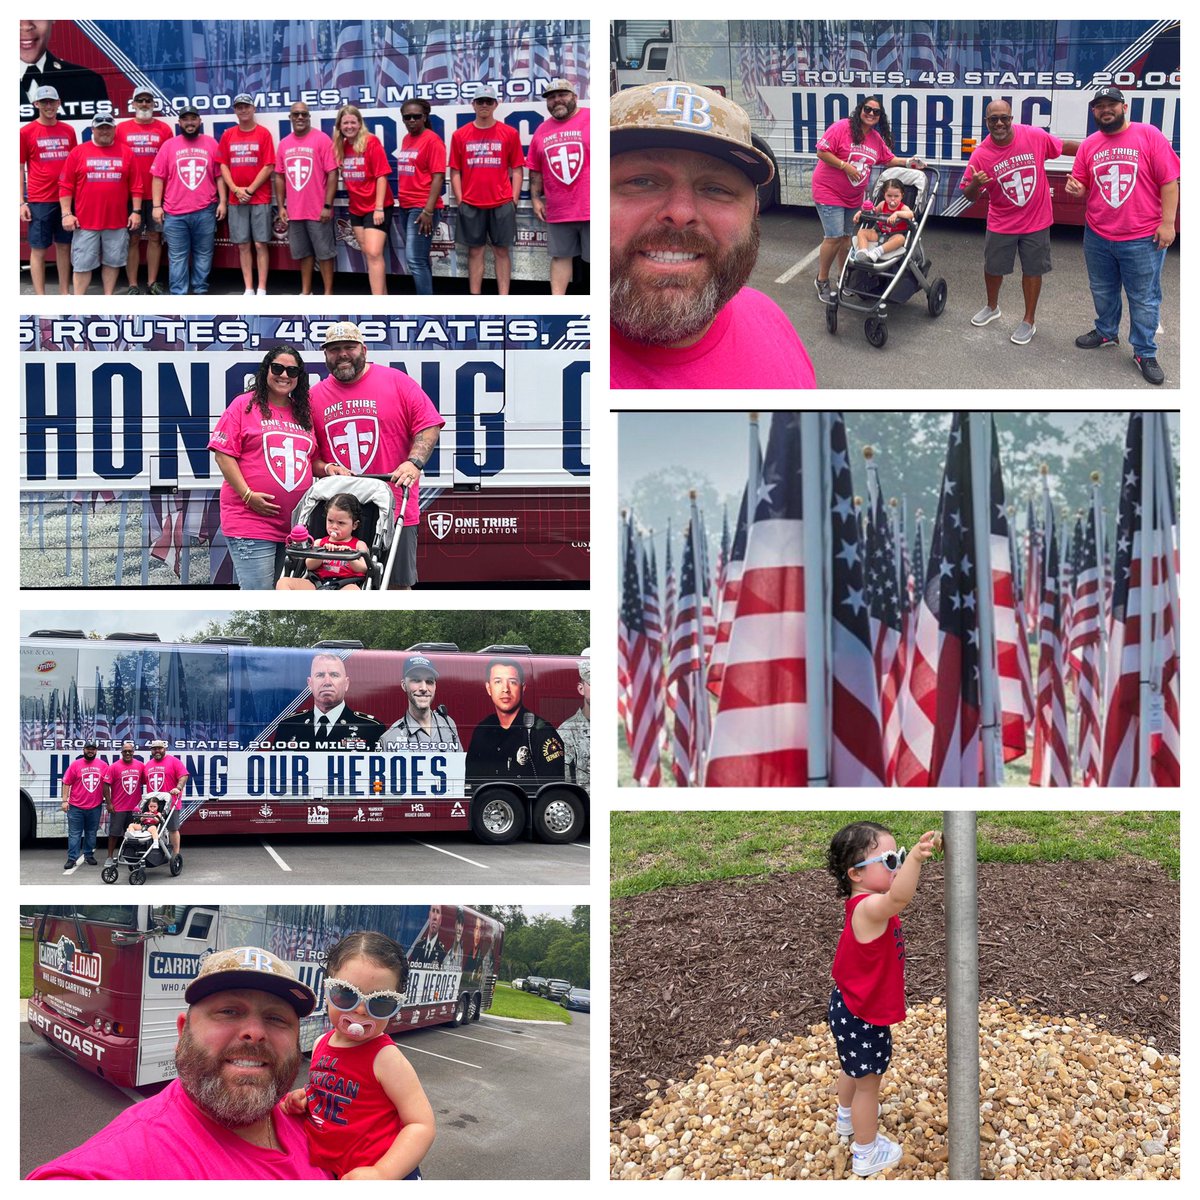 Great day with a small but mighty showing @CarryTheLoad at the FL National Cemetery in Bushnell! This was near and dear to my heart since my dad is buried here! 🇺🇸 @thayesnet @JonFreier @AnnieG_FL @Dplunk58 #CarryTheLoad